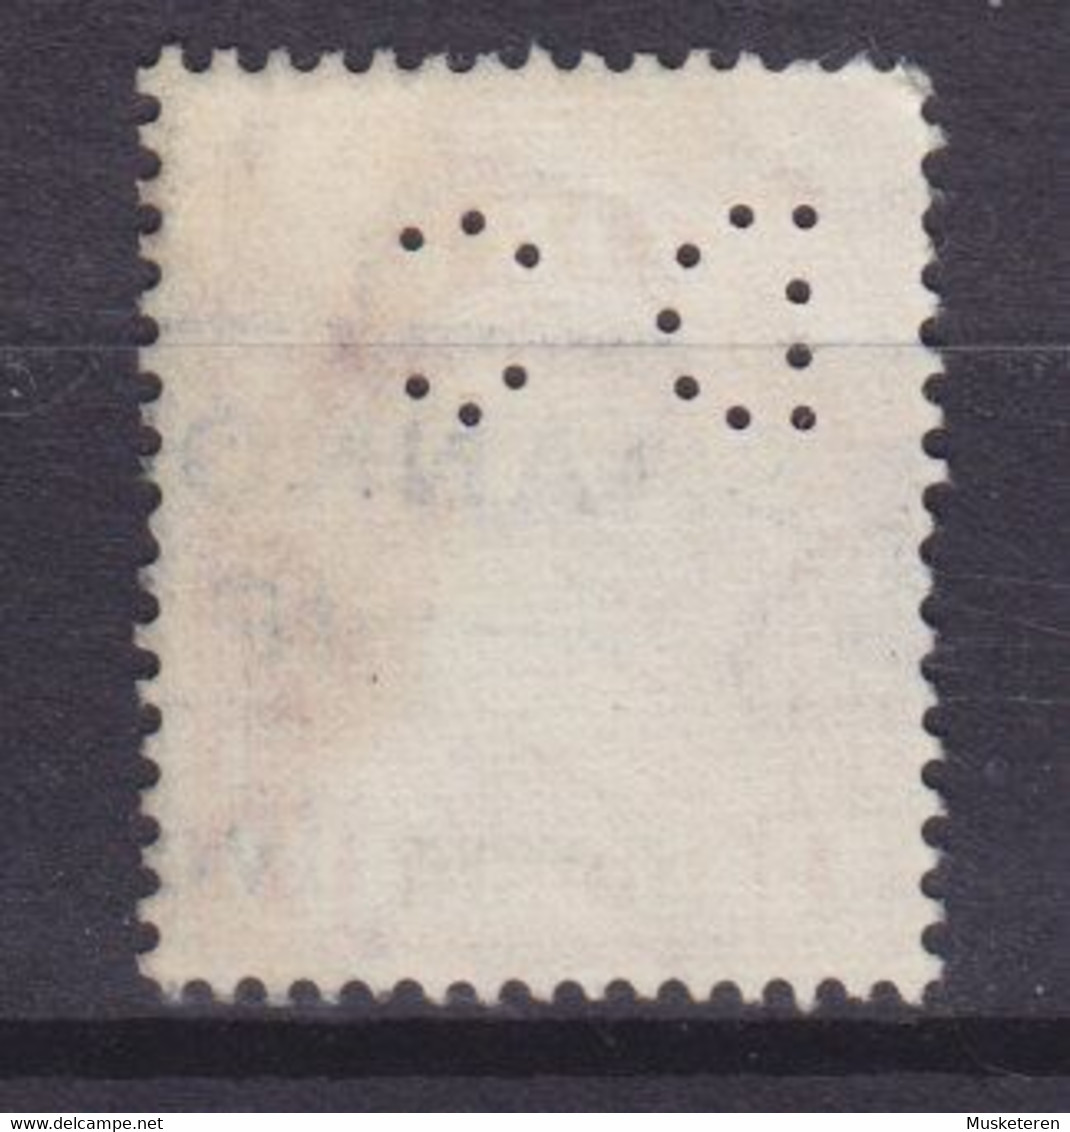 Ireland Perfin Perforé Lochung 'DC' ERROR Variety Missing Pinhole I 'C' (2 Scans) - Imperforates, Proofs & Errors